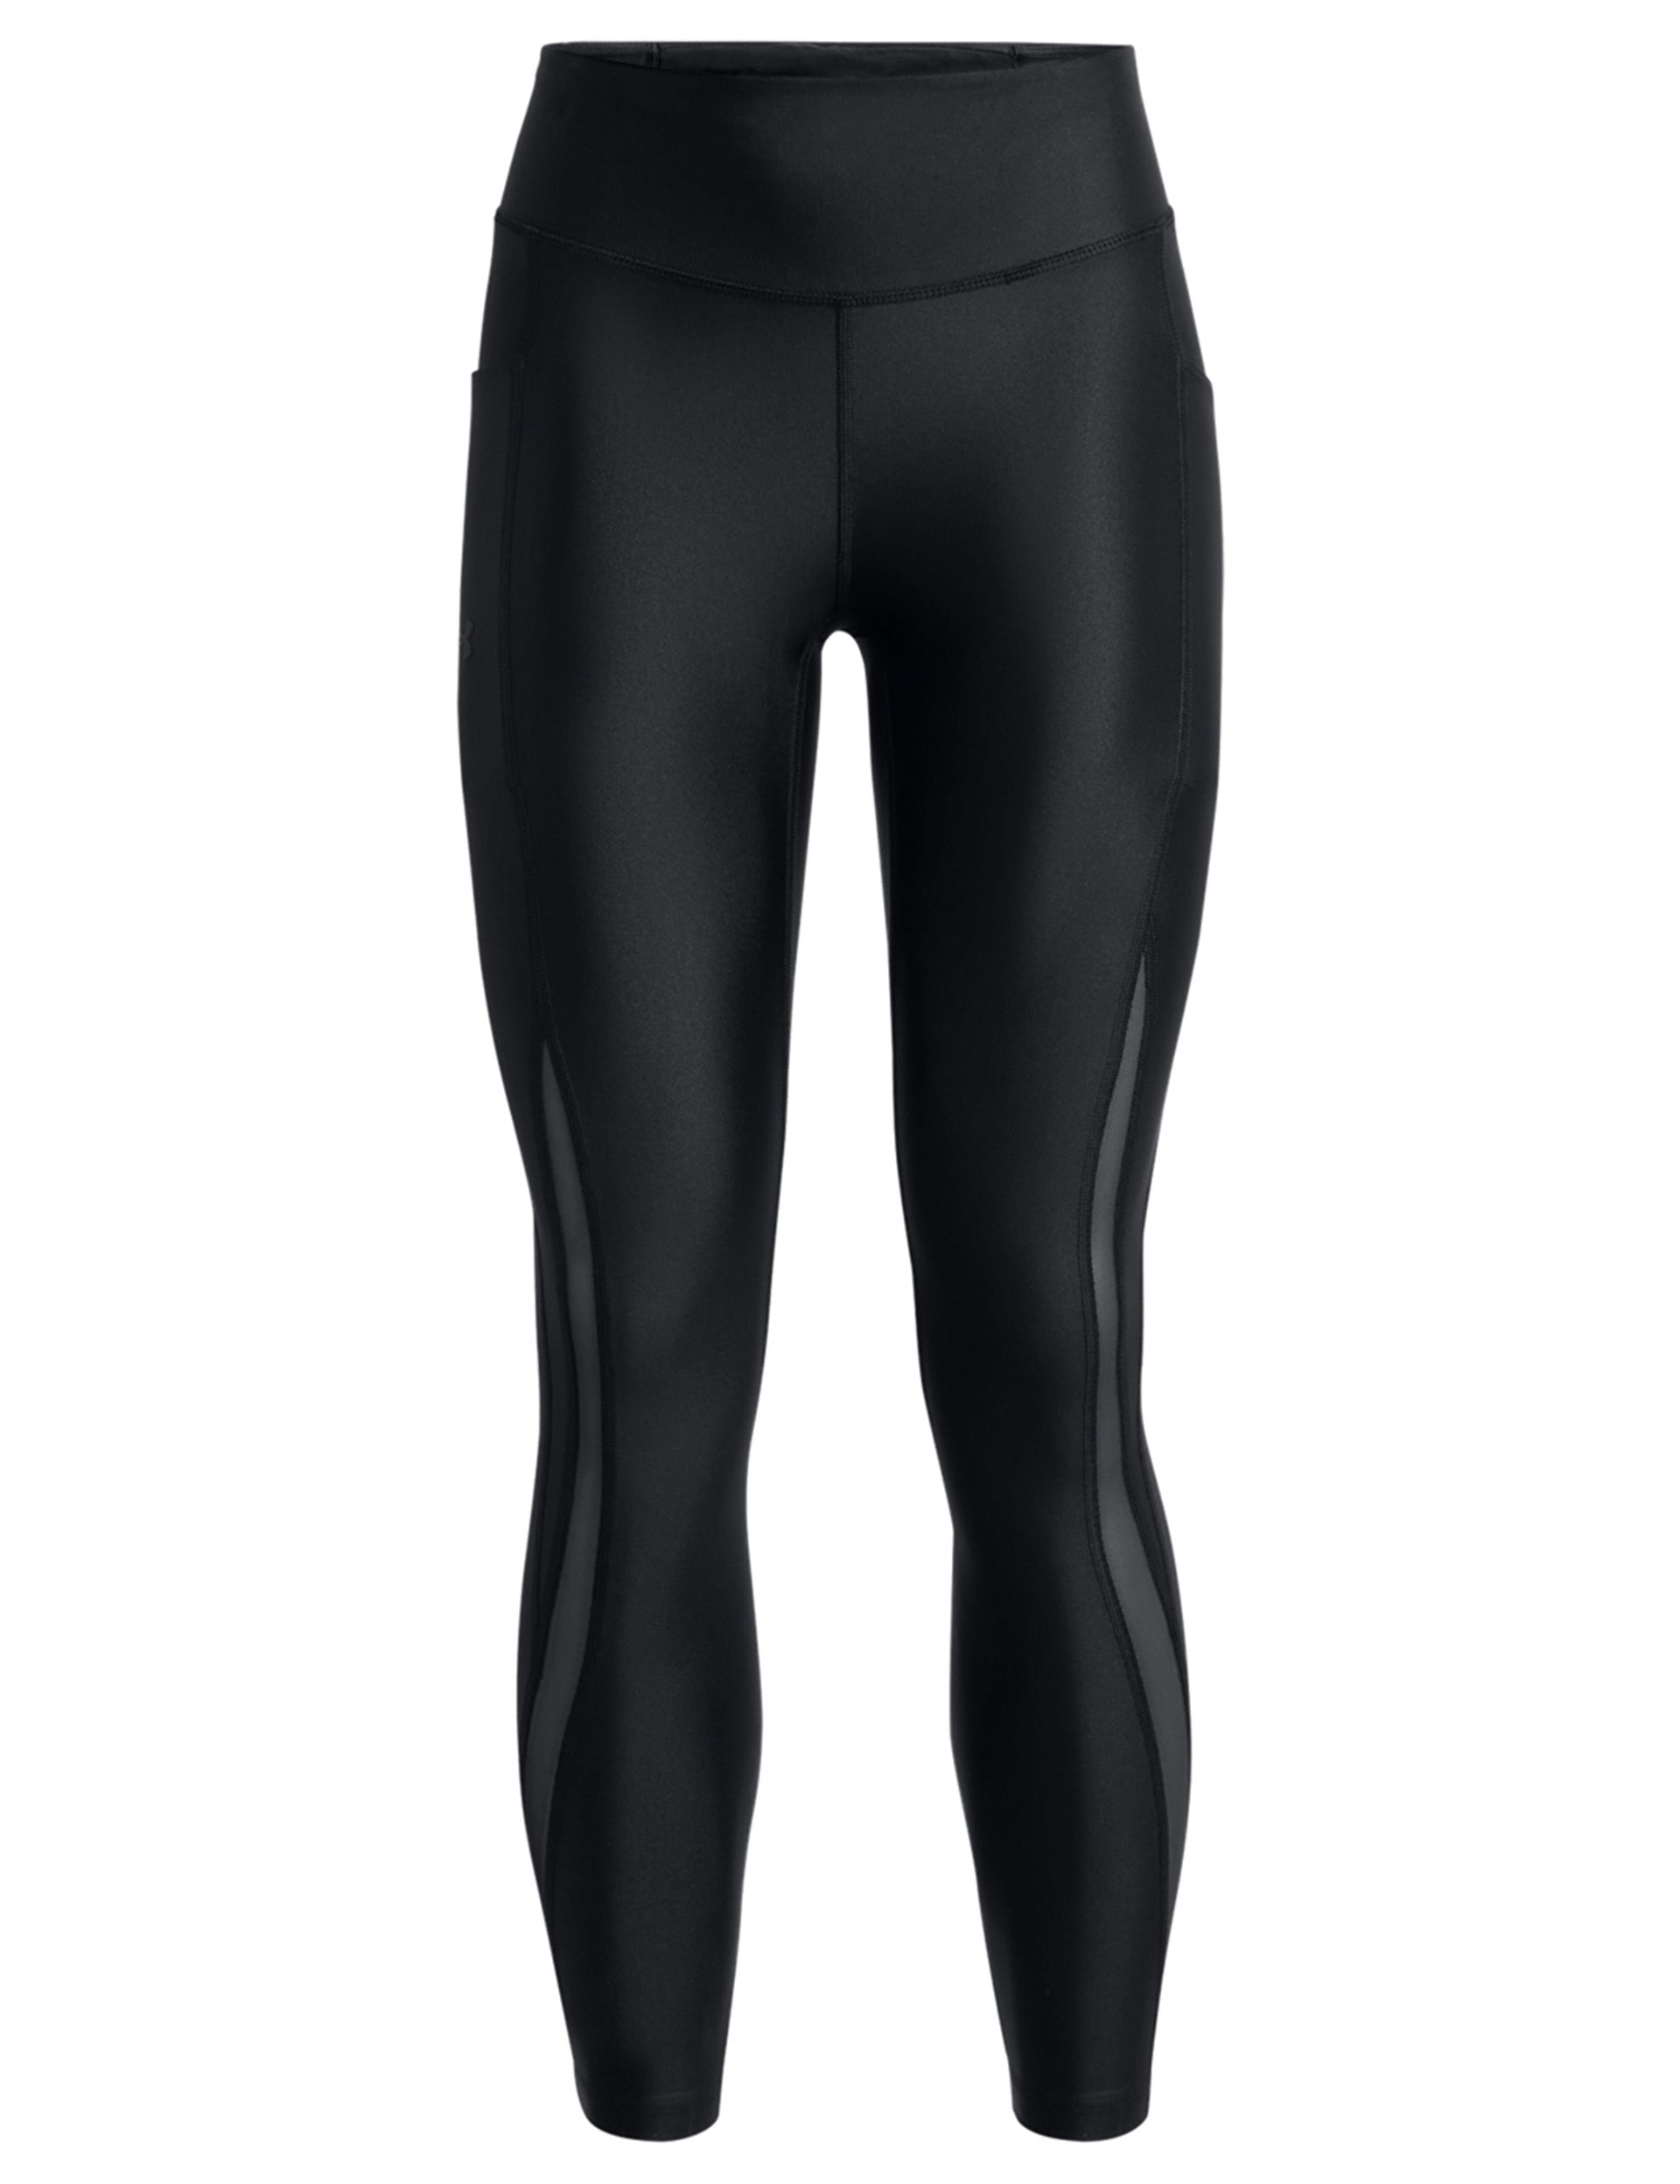 Buy Under Armour Fly Fast Elite IsoChill Ankle Tight Women Black